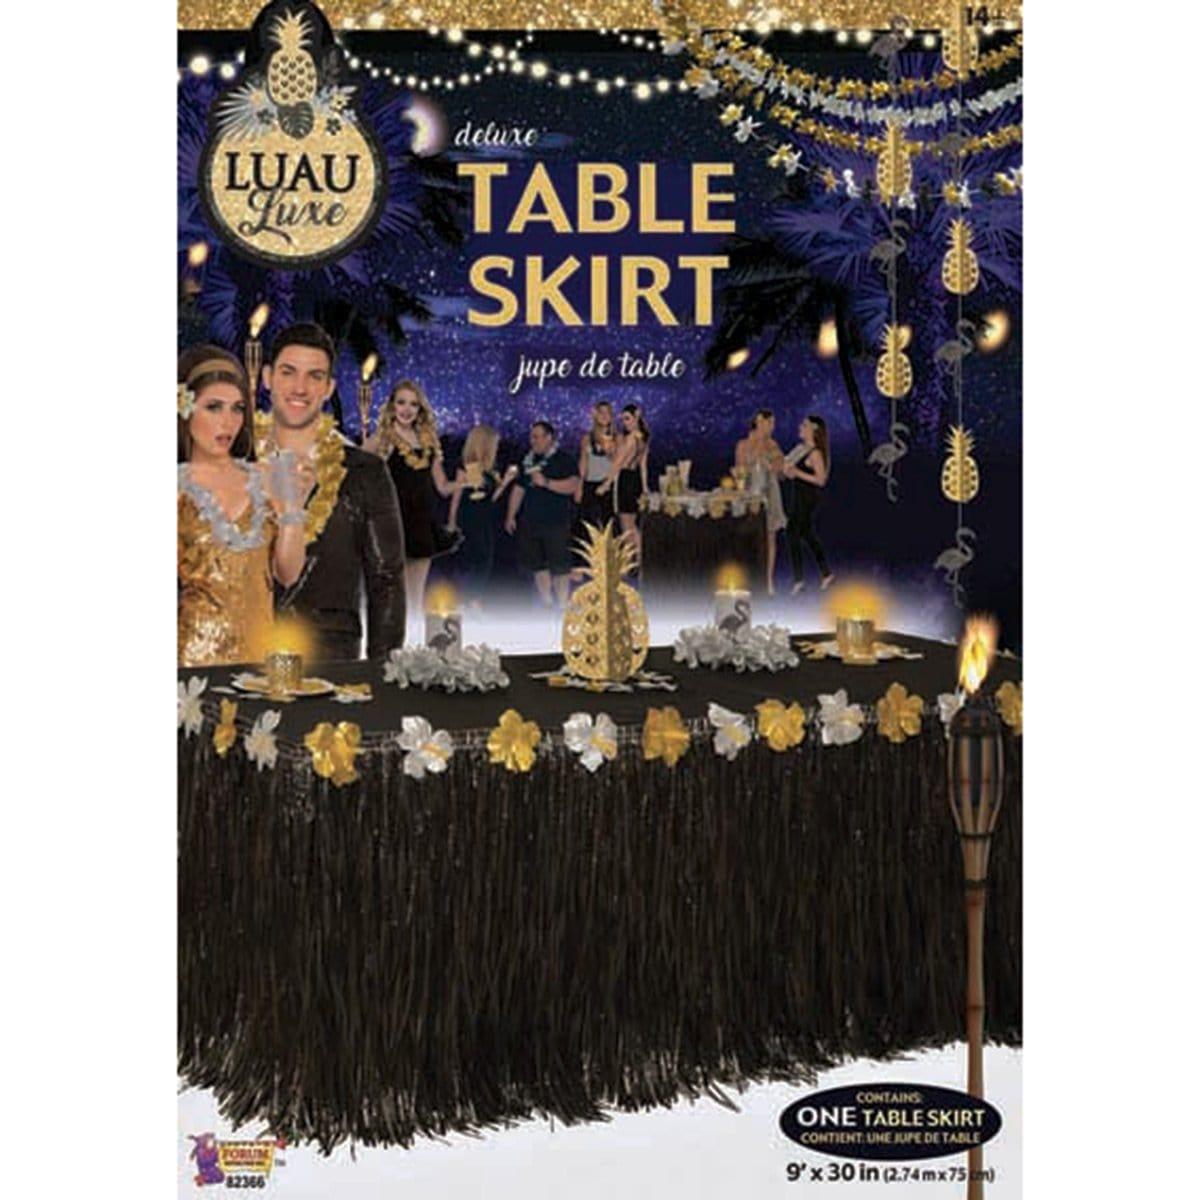 Buy Theme Party Luau Deluxe Table Skirt sold at Party Expert